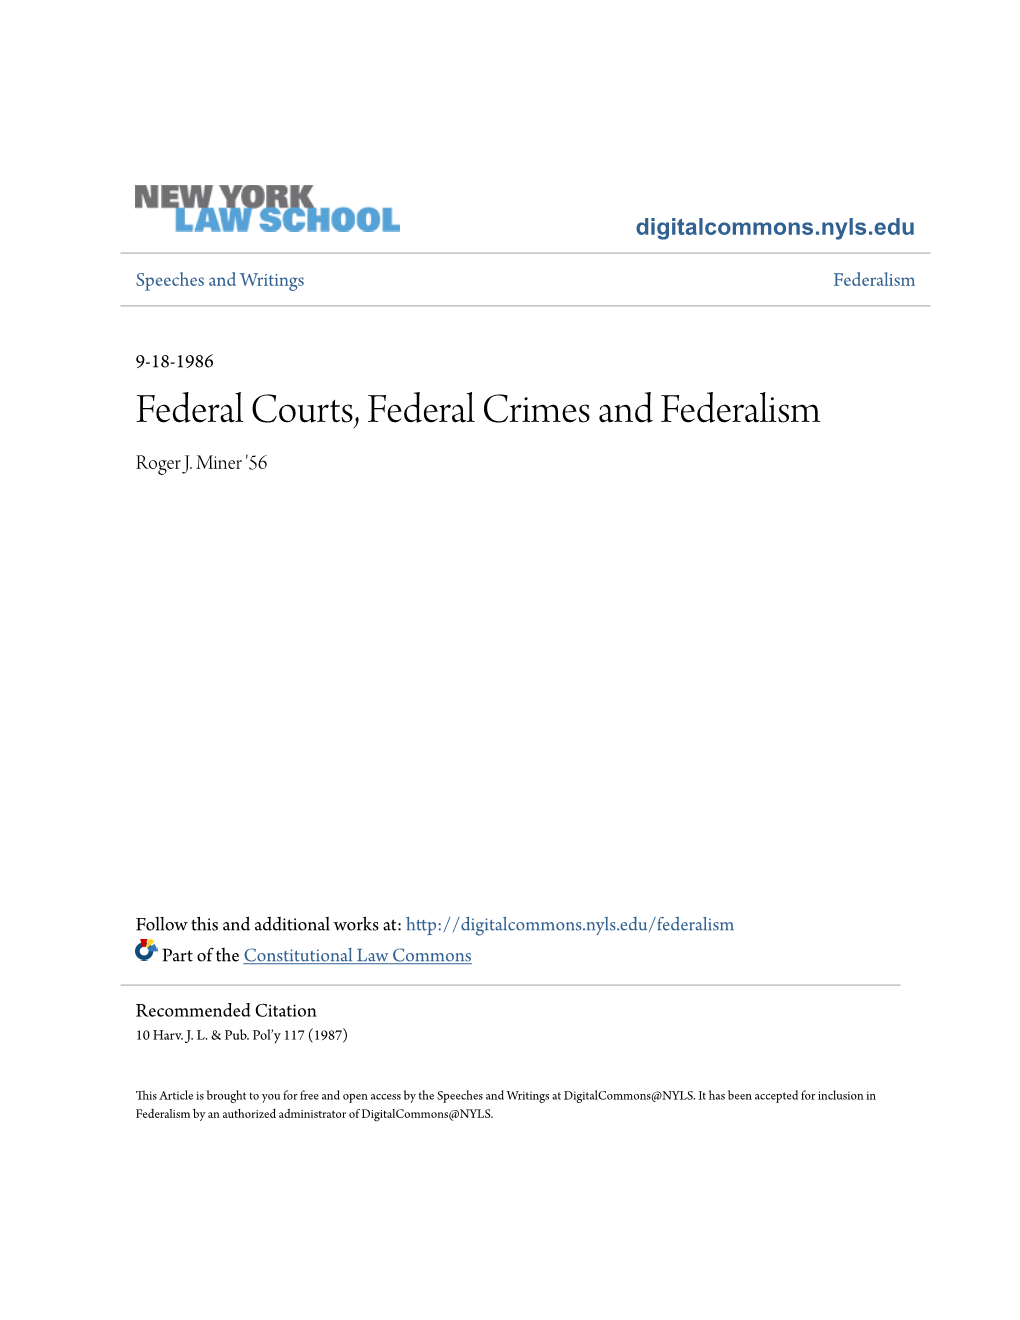 Federal Courts, Federal Crimes and Federalism Roger J